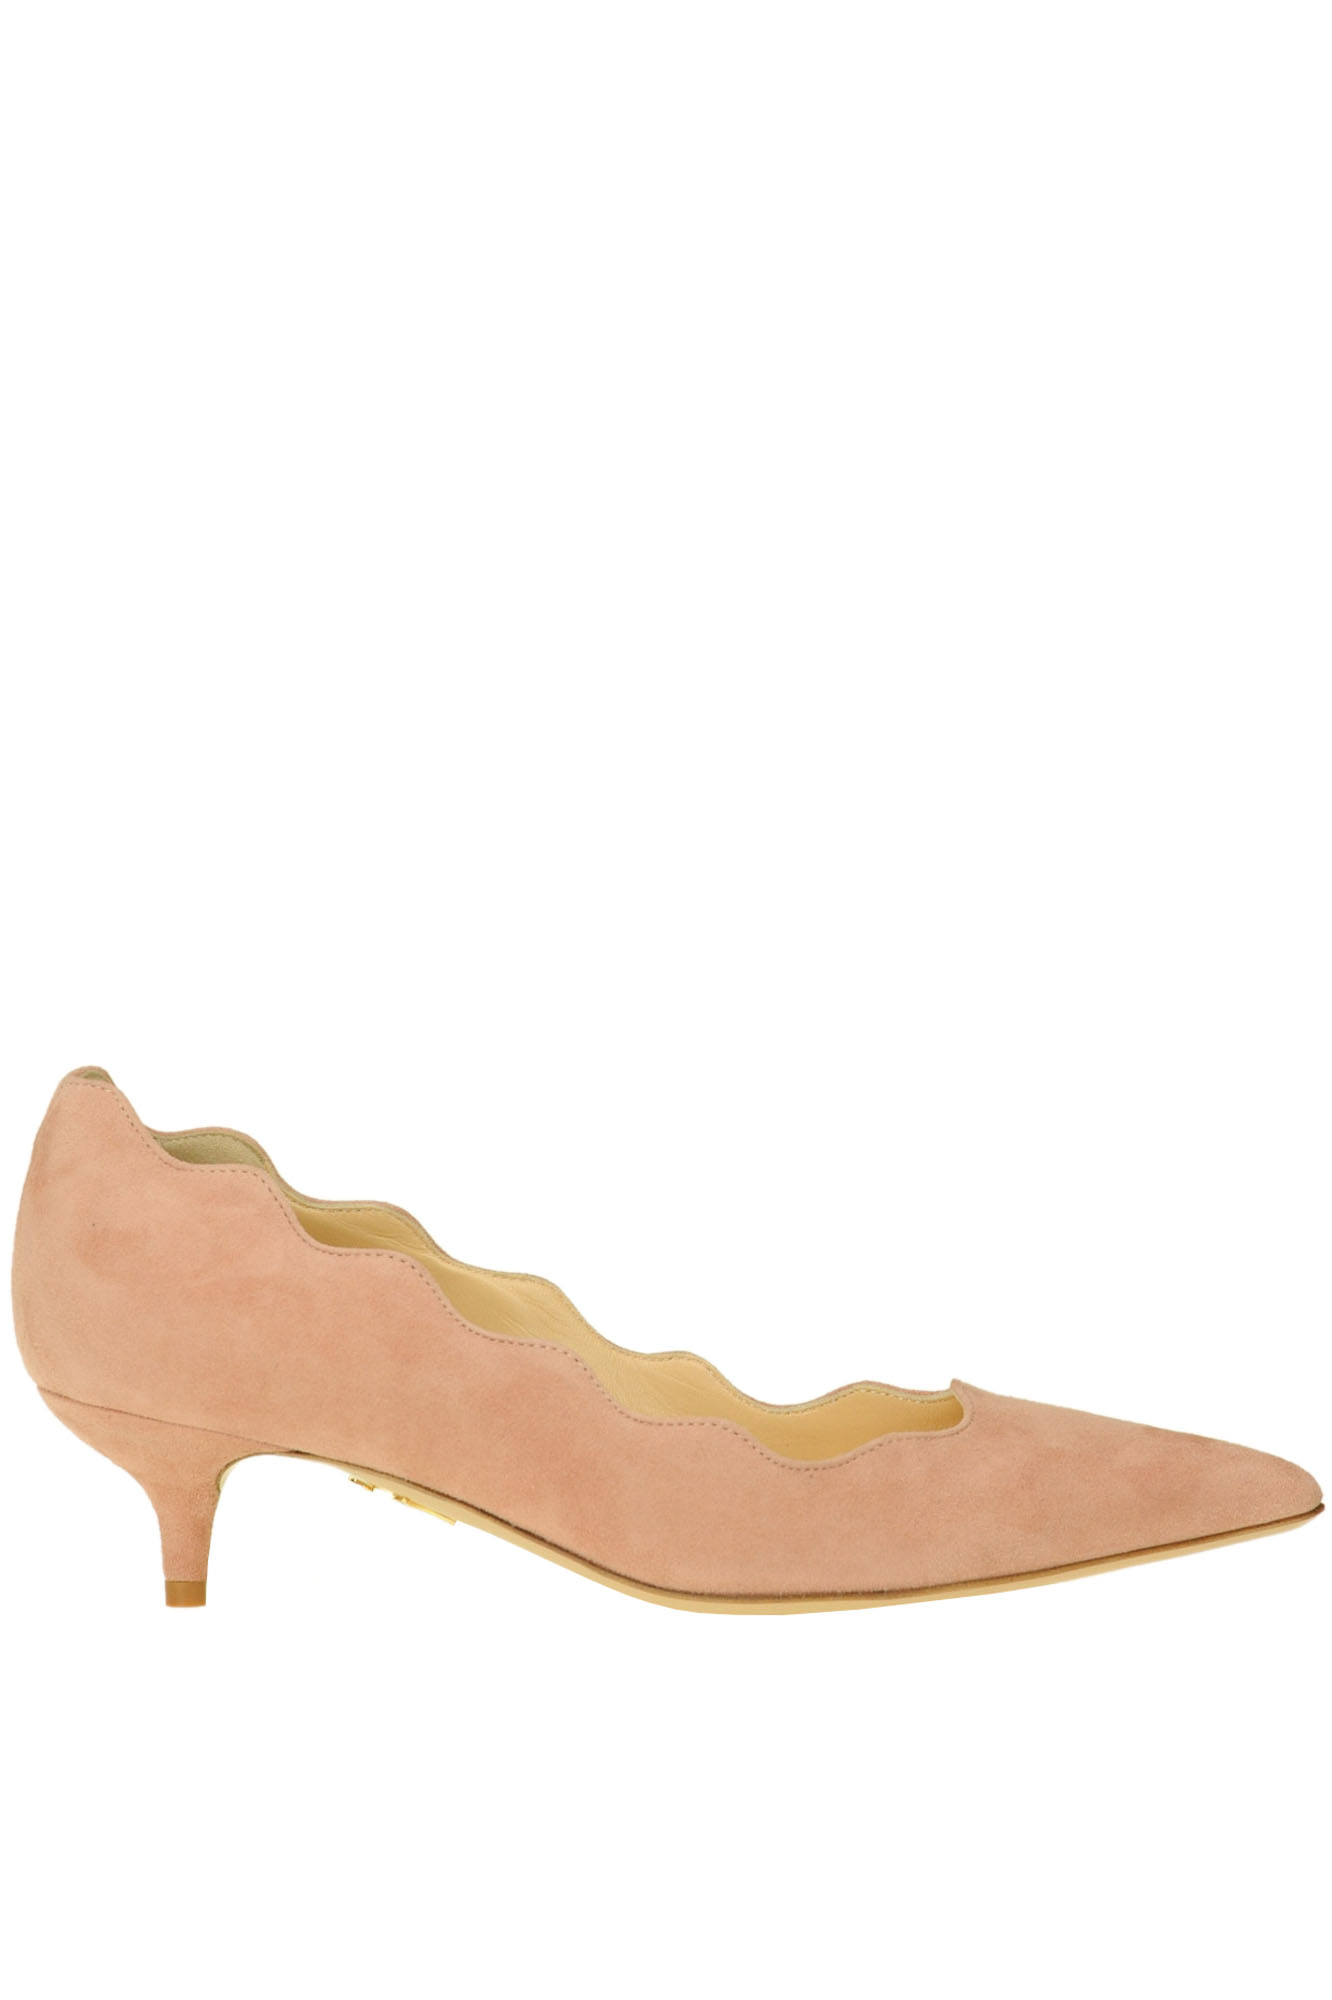 CHARLOTTE OLYMPIA SUEDE PUMPS